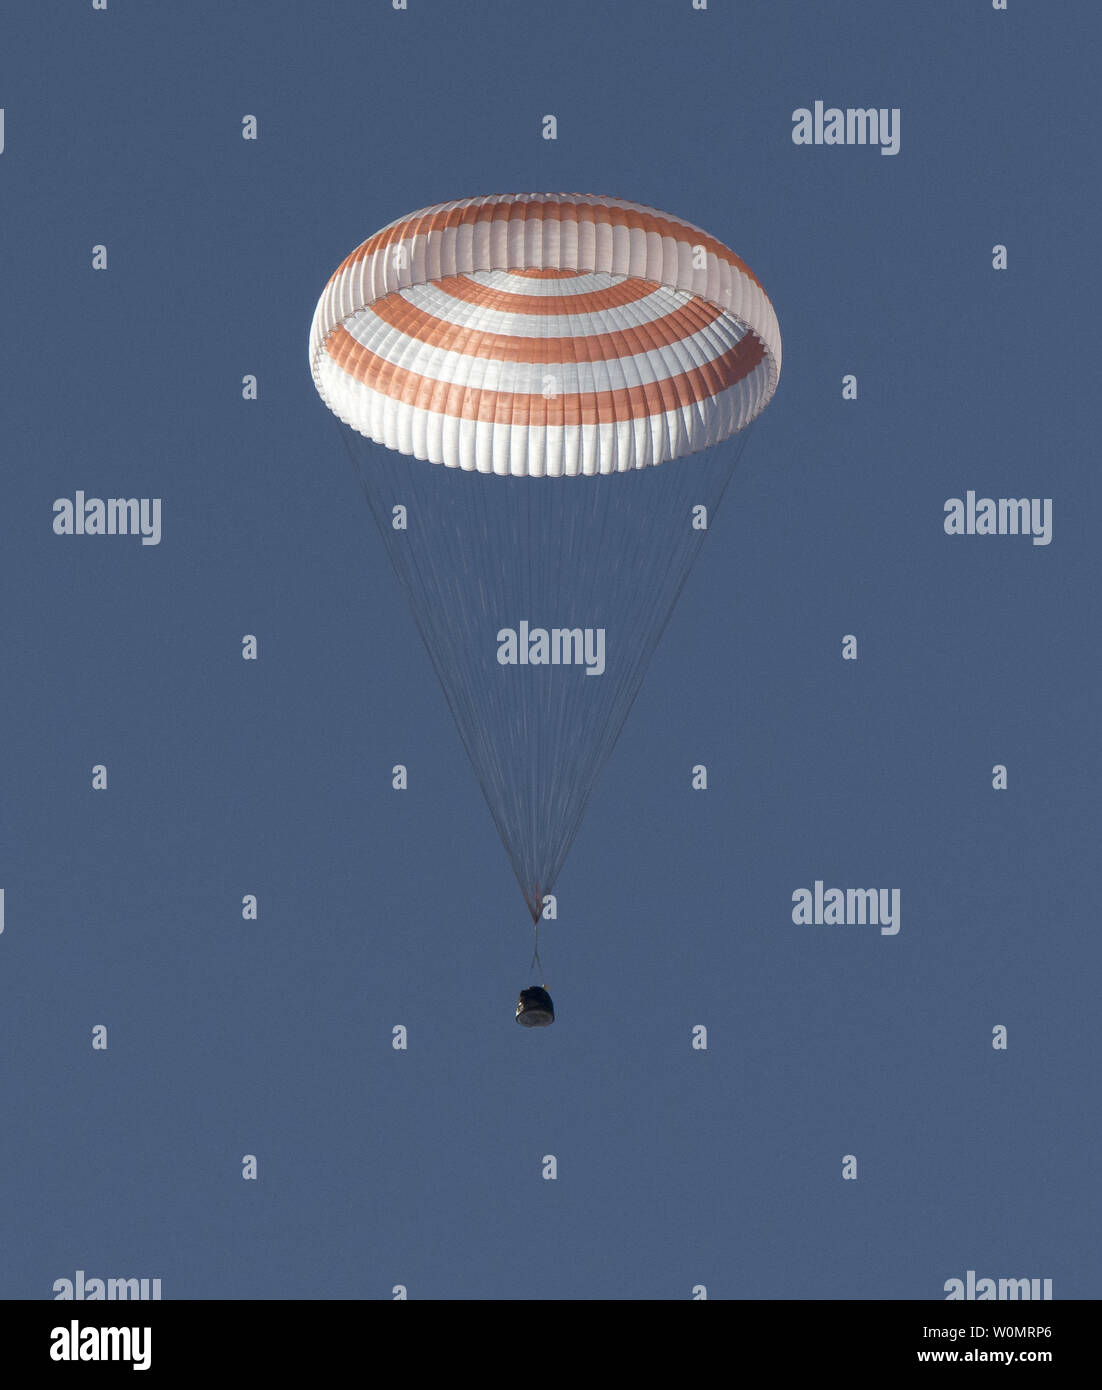 The Soyuz MS-02 spacecraft is seen as it lands with Expedition 50 Commander Shane Kimbrough of NASA and Flight Engineers Sergey Ryzhikov and Andrey Borisenko of Roscosmos near the town of Zhezkazgan, Kazakhstan on Monday, April 10, 2017 (Kazakh time). Kimbrough, Ryzhikov, and Borisenko are returning after 173 days in space where they served as members of the Expedition 49 and 50 crews onboard the International Space Station.      NASA Photo by Bill Ingalls/UPI Stock Photo